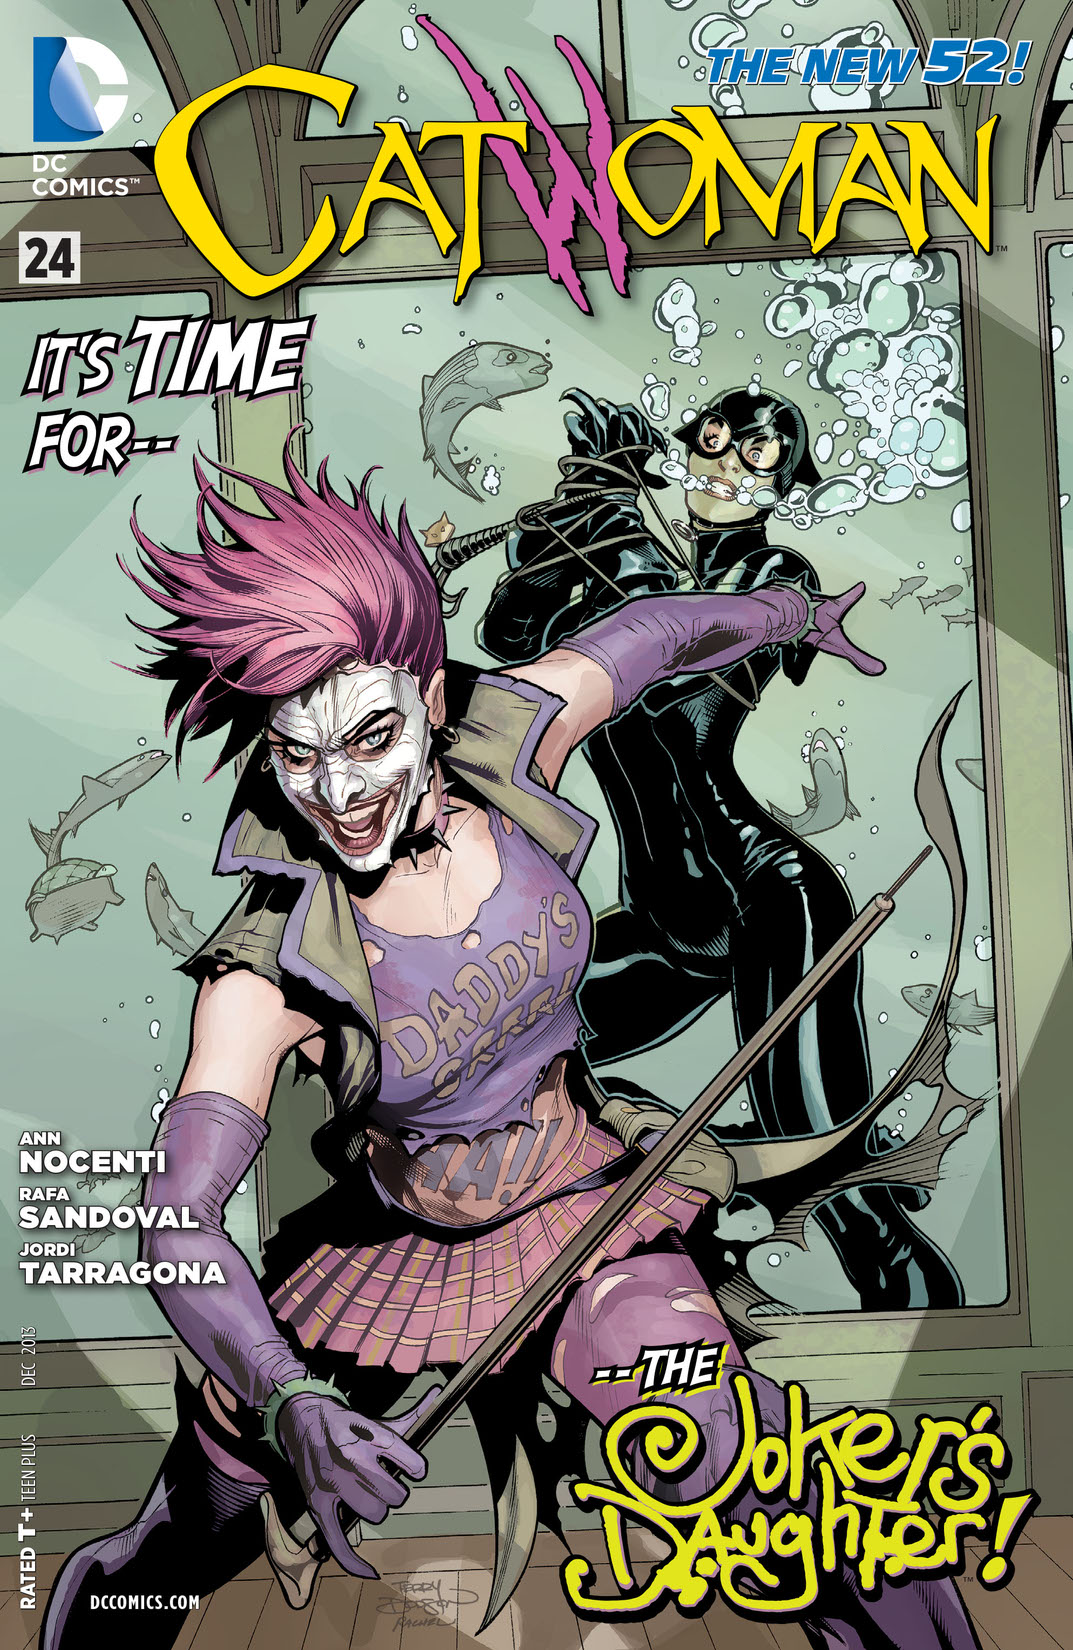 Catwoman (2011-) #24 preview images